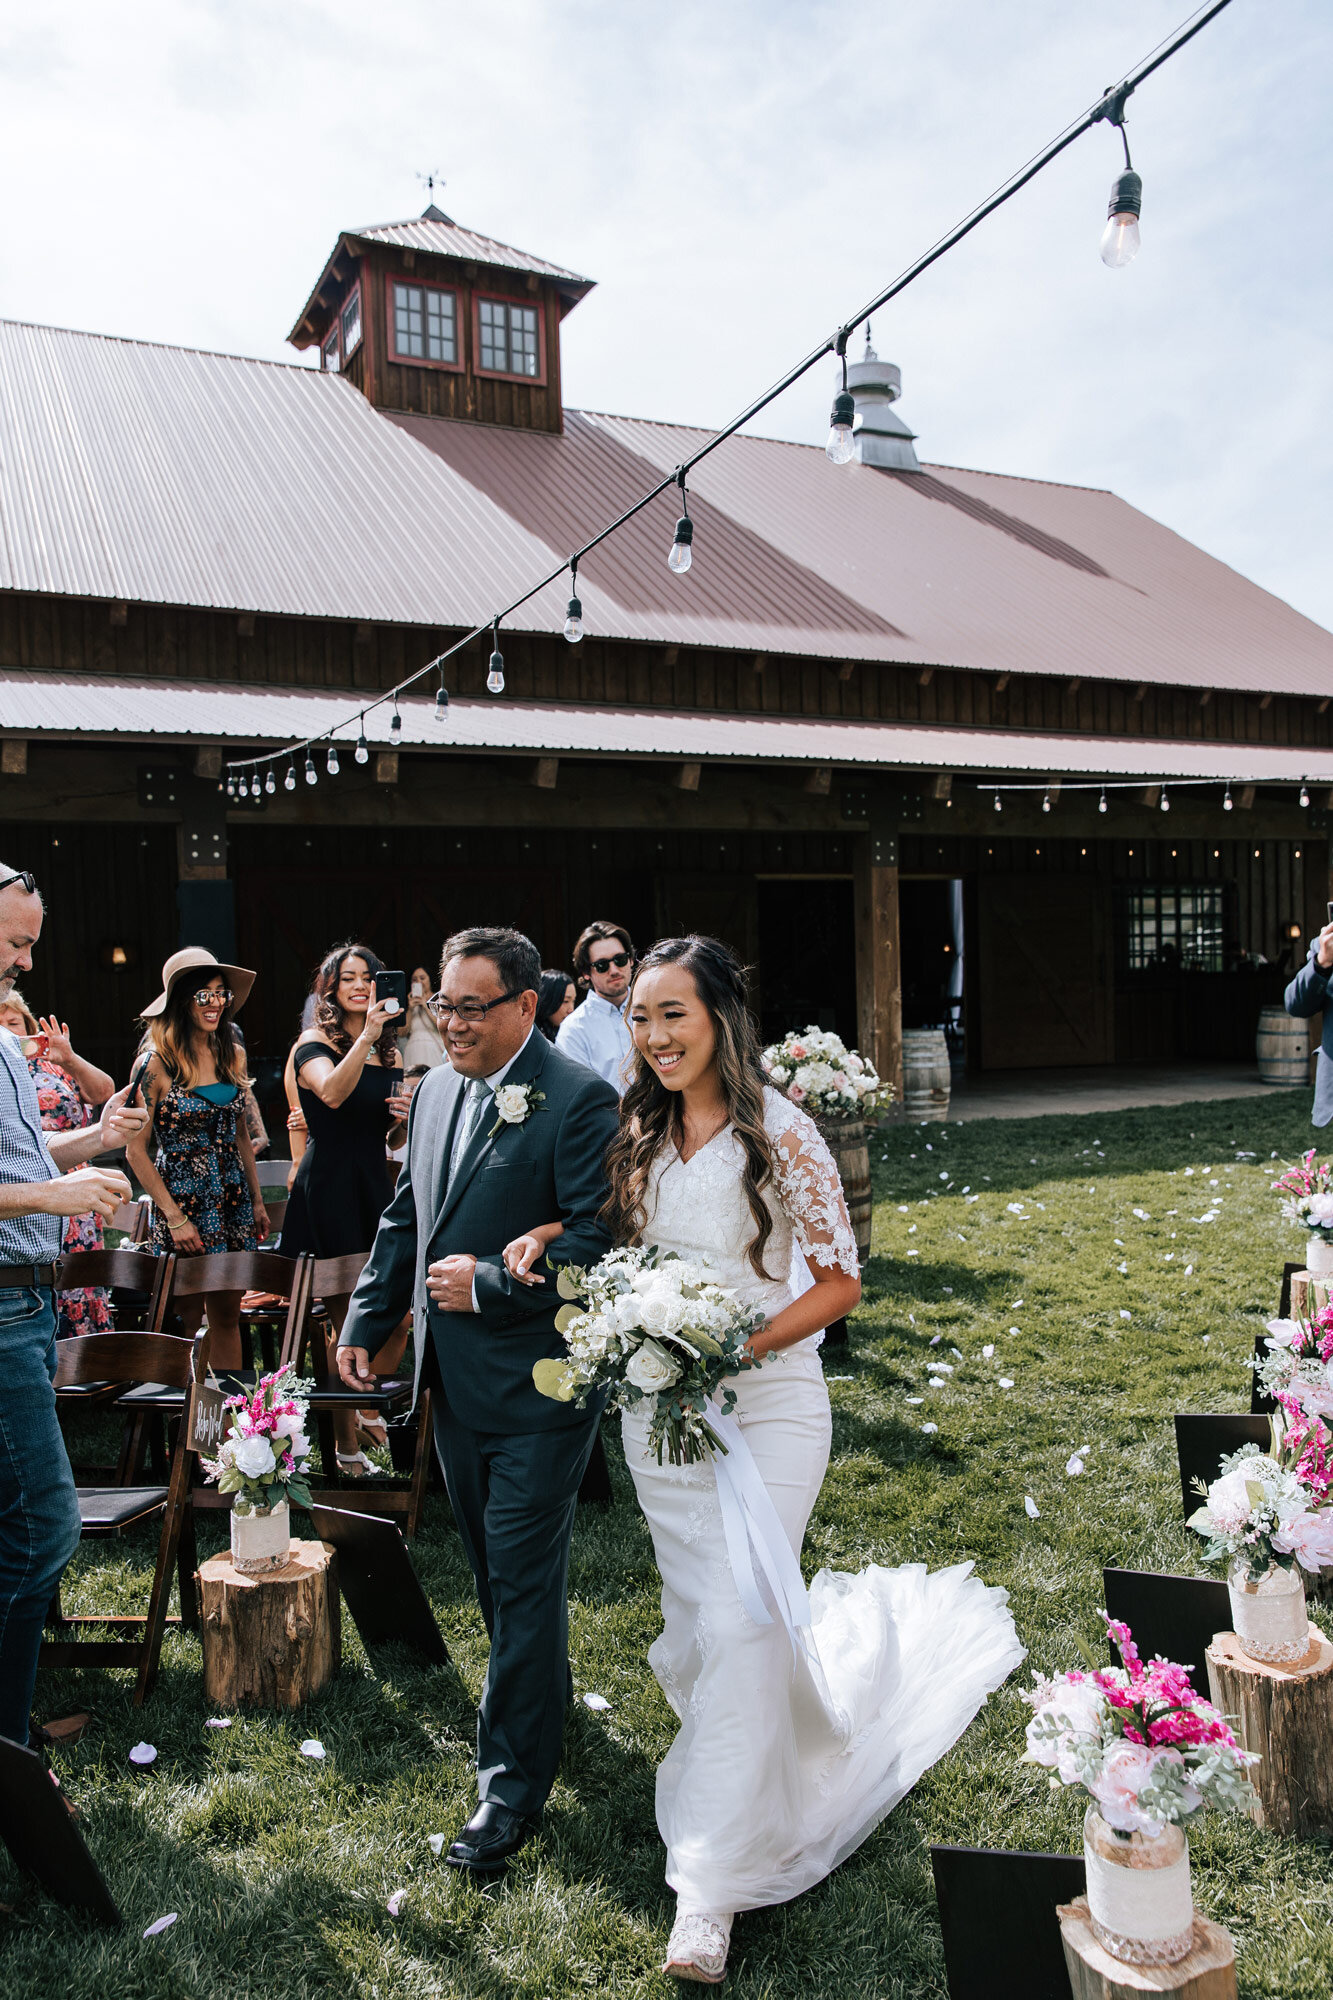  Bride and her father walk down the aisle arm in arm in a beautiful farm wedding venue in Mapleton, Utah was taken by Emily Jenkins Photography. escorting the bride walk down the aisle Utah wedding venue #emilyjenkinsphotography #emilyjenkinsweddings